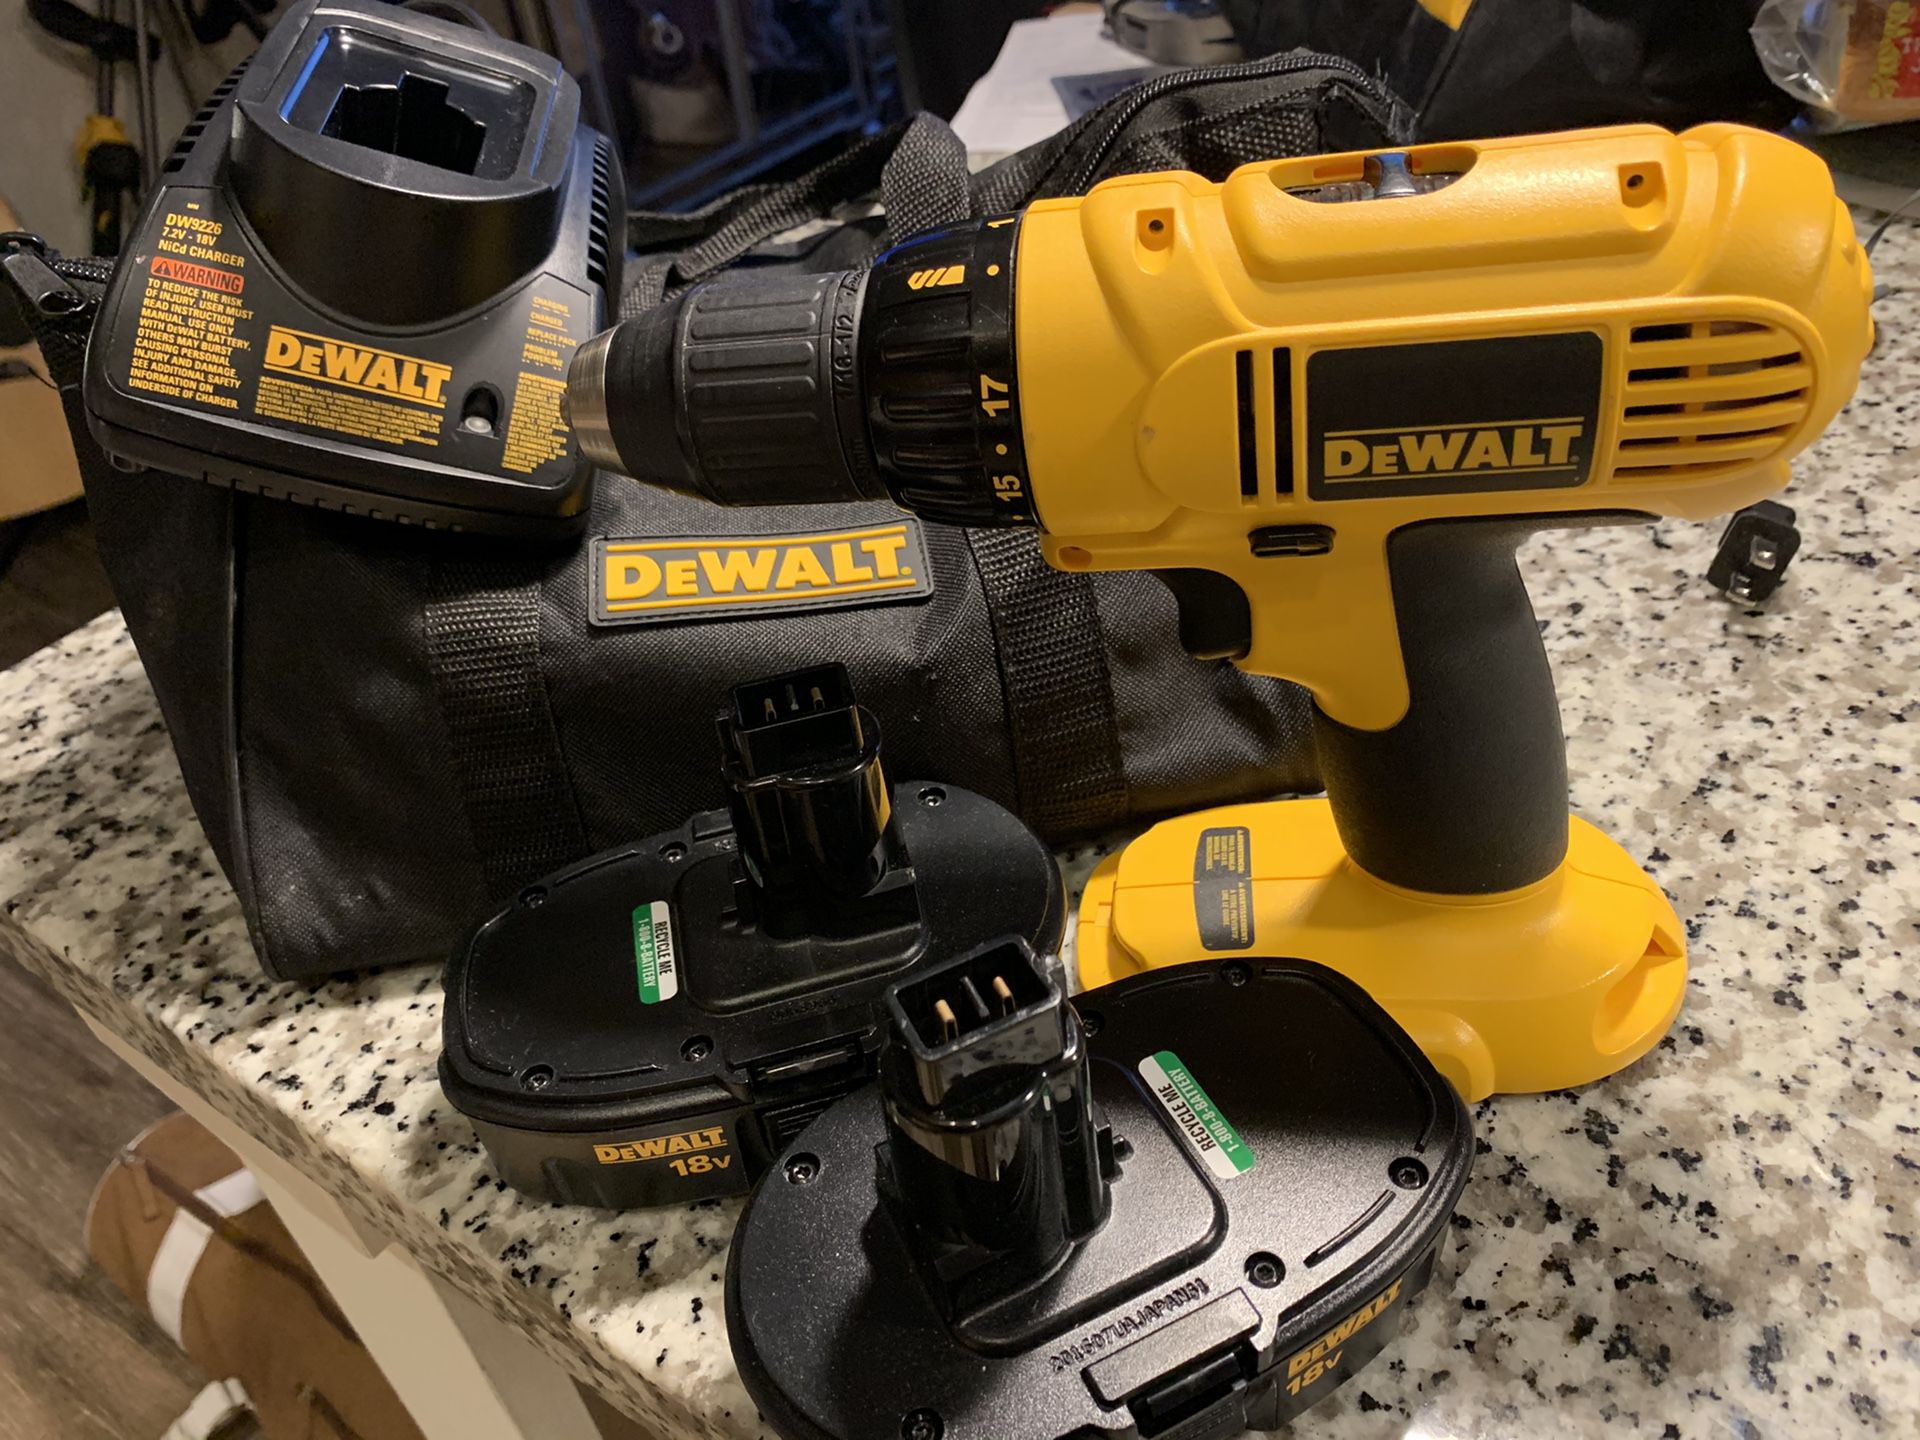 Dewalt Drill - 2 battery’s, charger, bag - never used